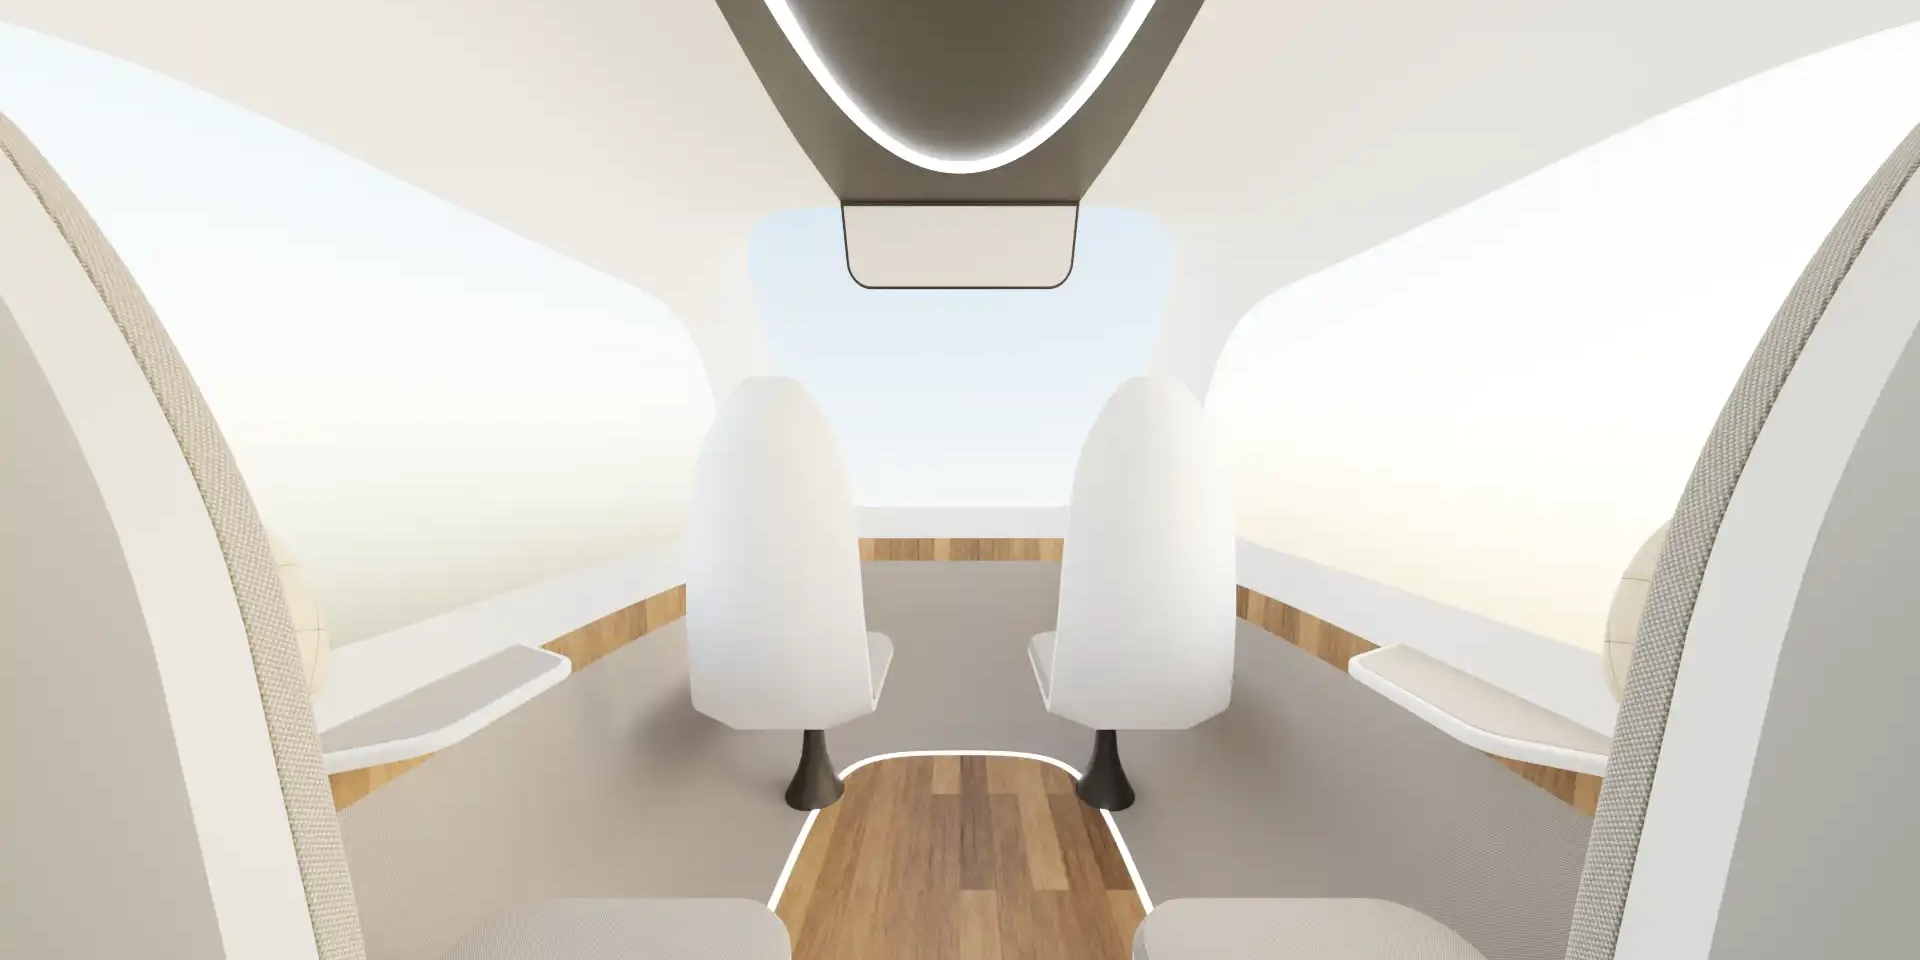 render of a passenger drone's interior